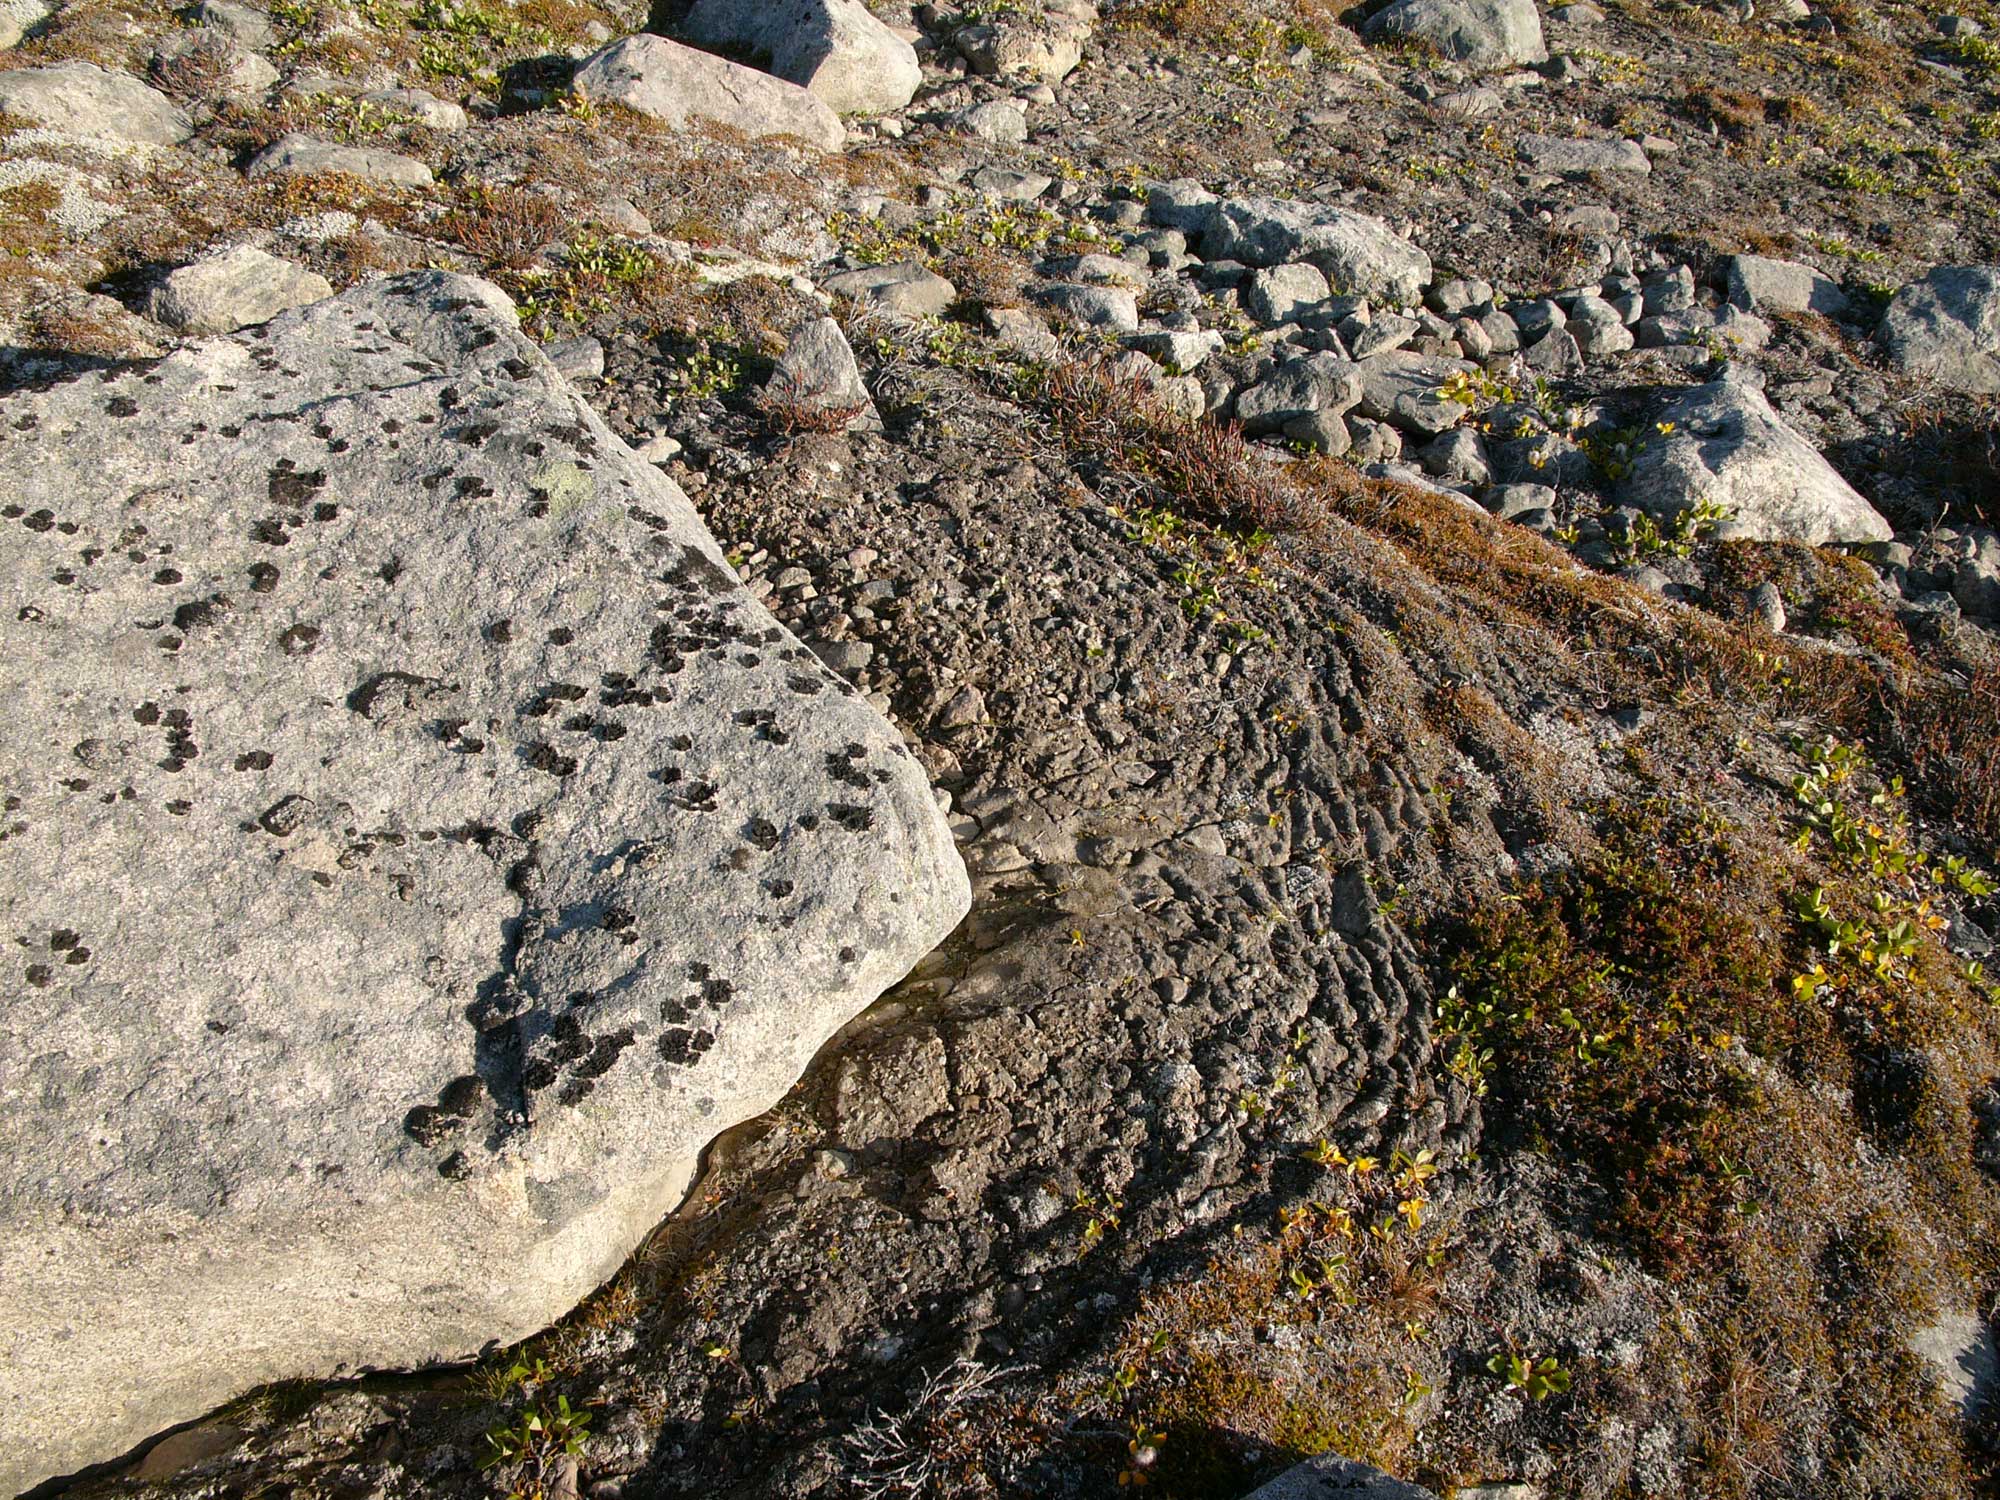 Photograph showing solifluction in Svalbard, Norway. The photo shows wrinkled ground that has apparently shifted due to solifluction.